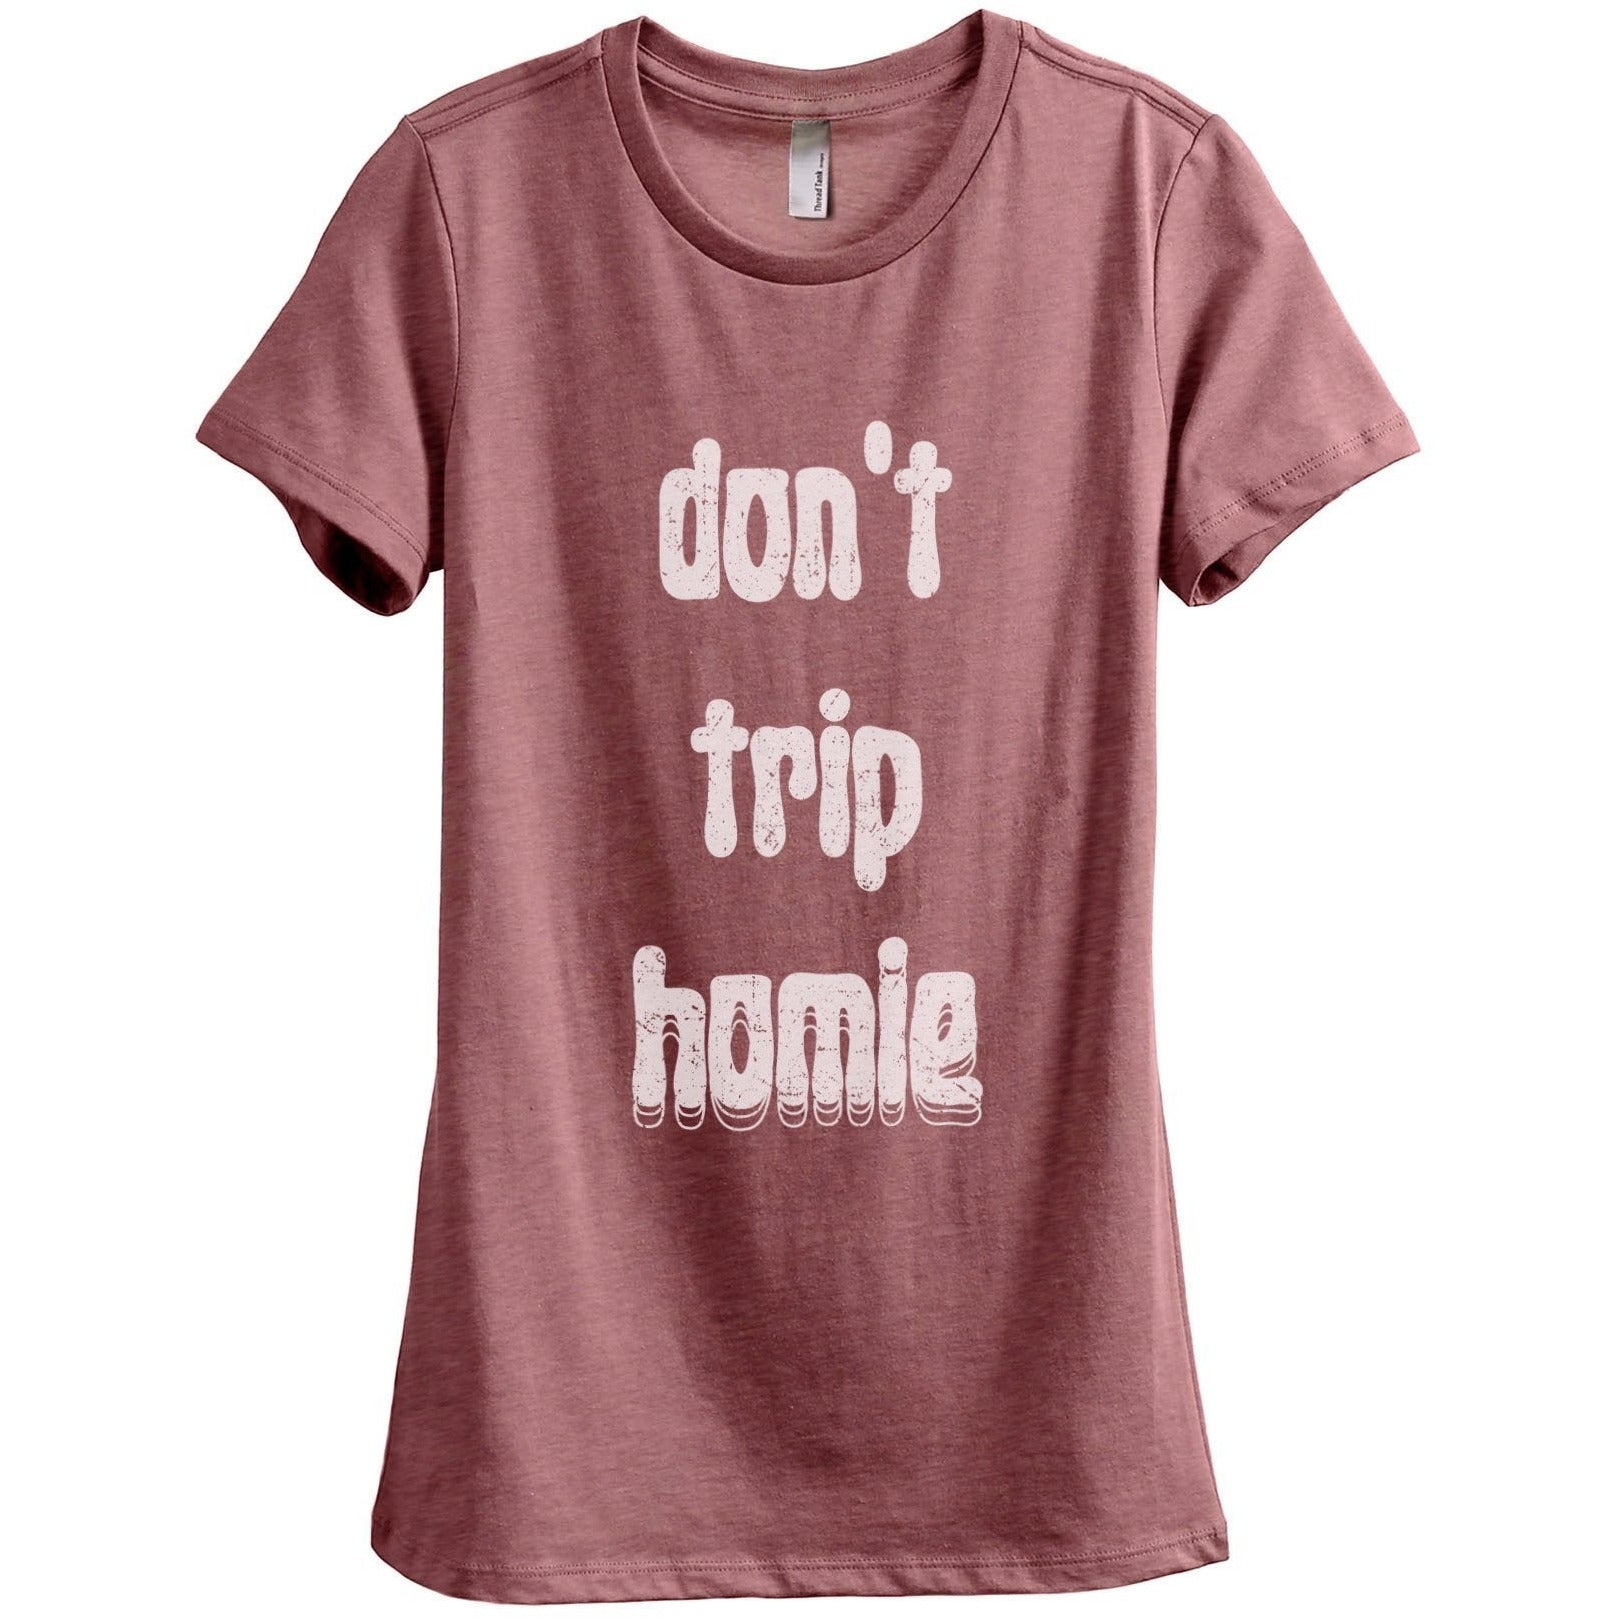 Don't Trip Homie Women's Relaxed Crewneck T-Shirt Top Tee Heather Rouge